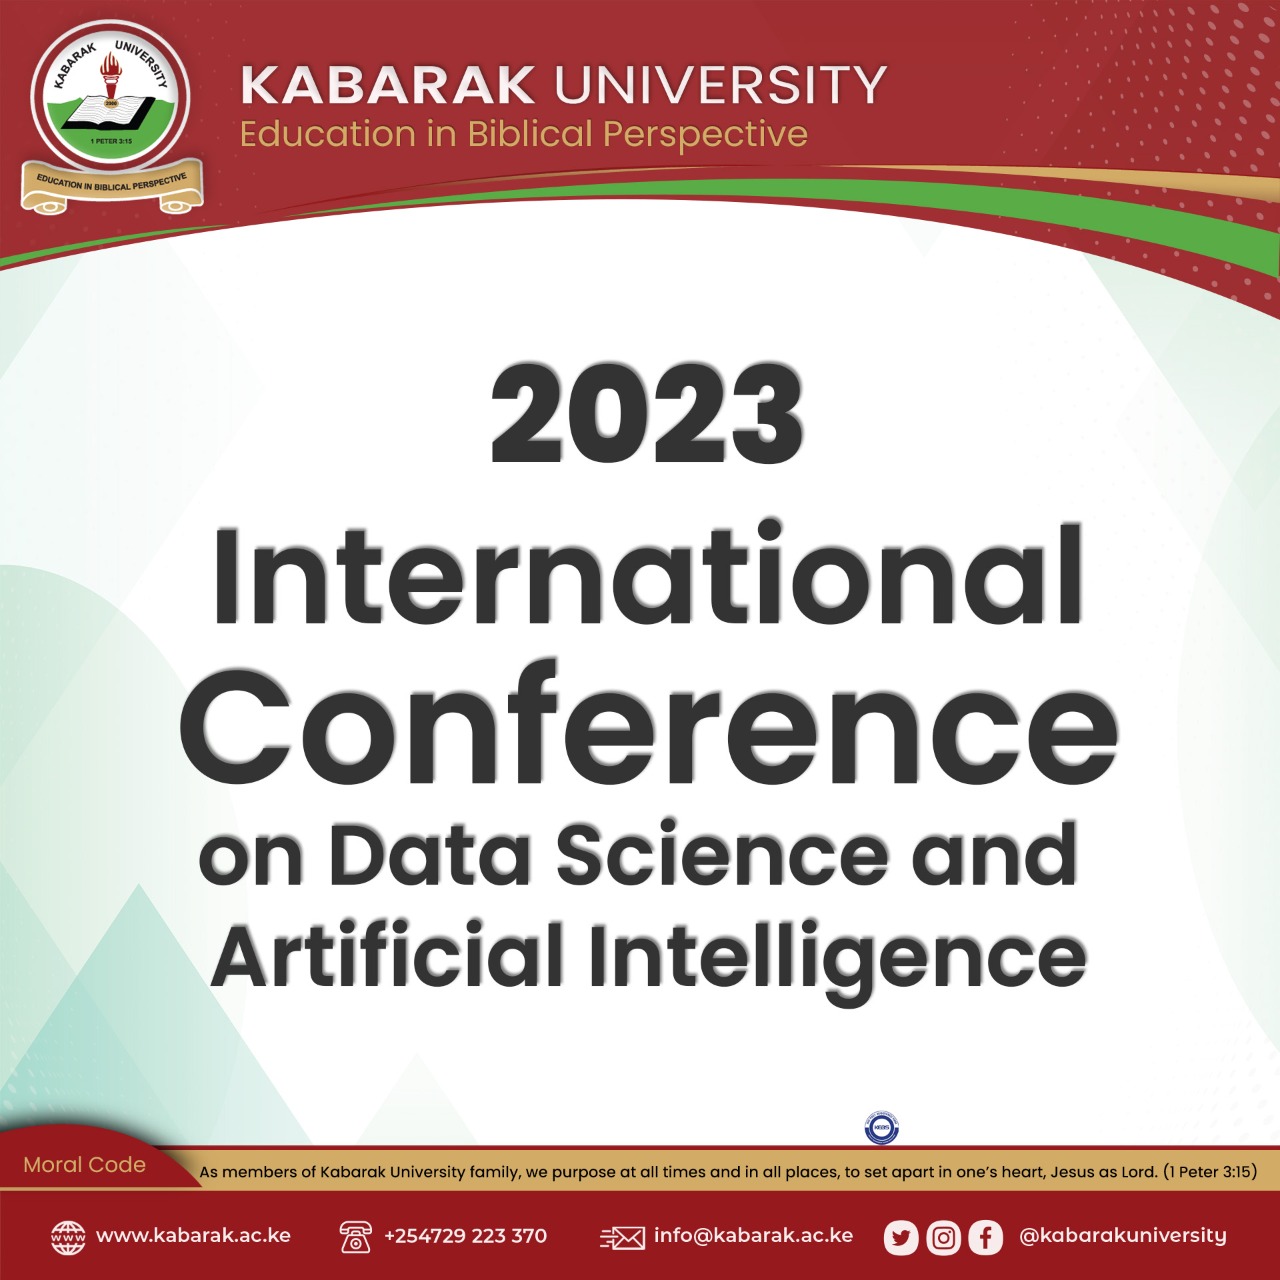 Data Science and Artificial Intelligence Conference 2023